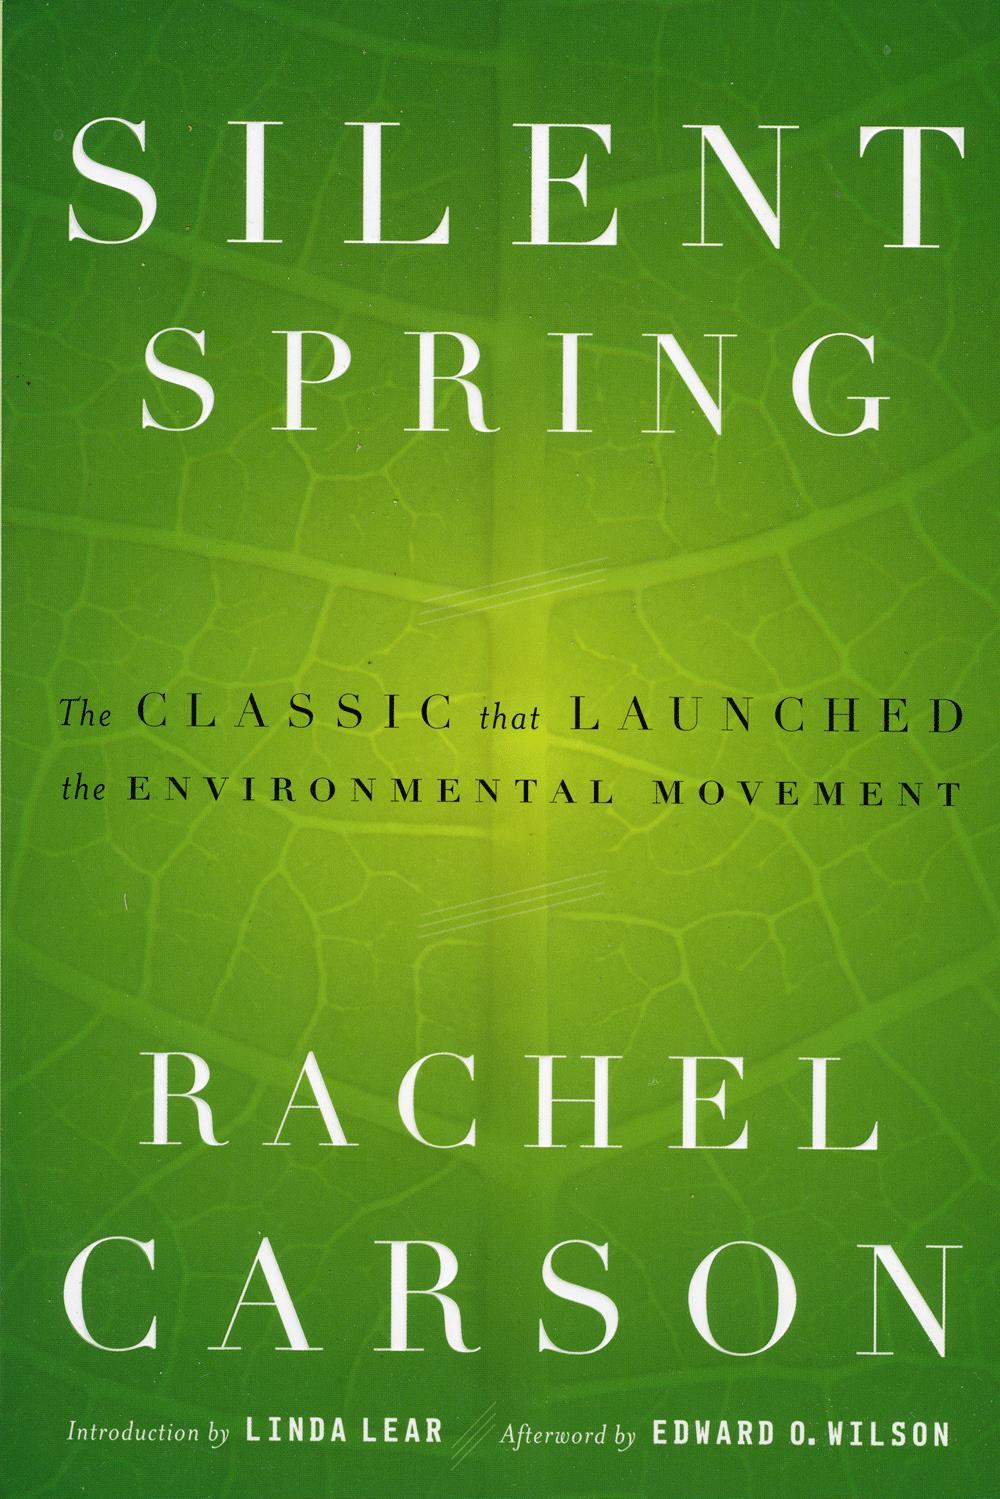 Rachel Carson s Silent Spring The publication in 1962 of Silent Spring brought home to millions of readers the effects of DDT, an insecticide widely used by home owners and farmers.